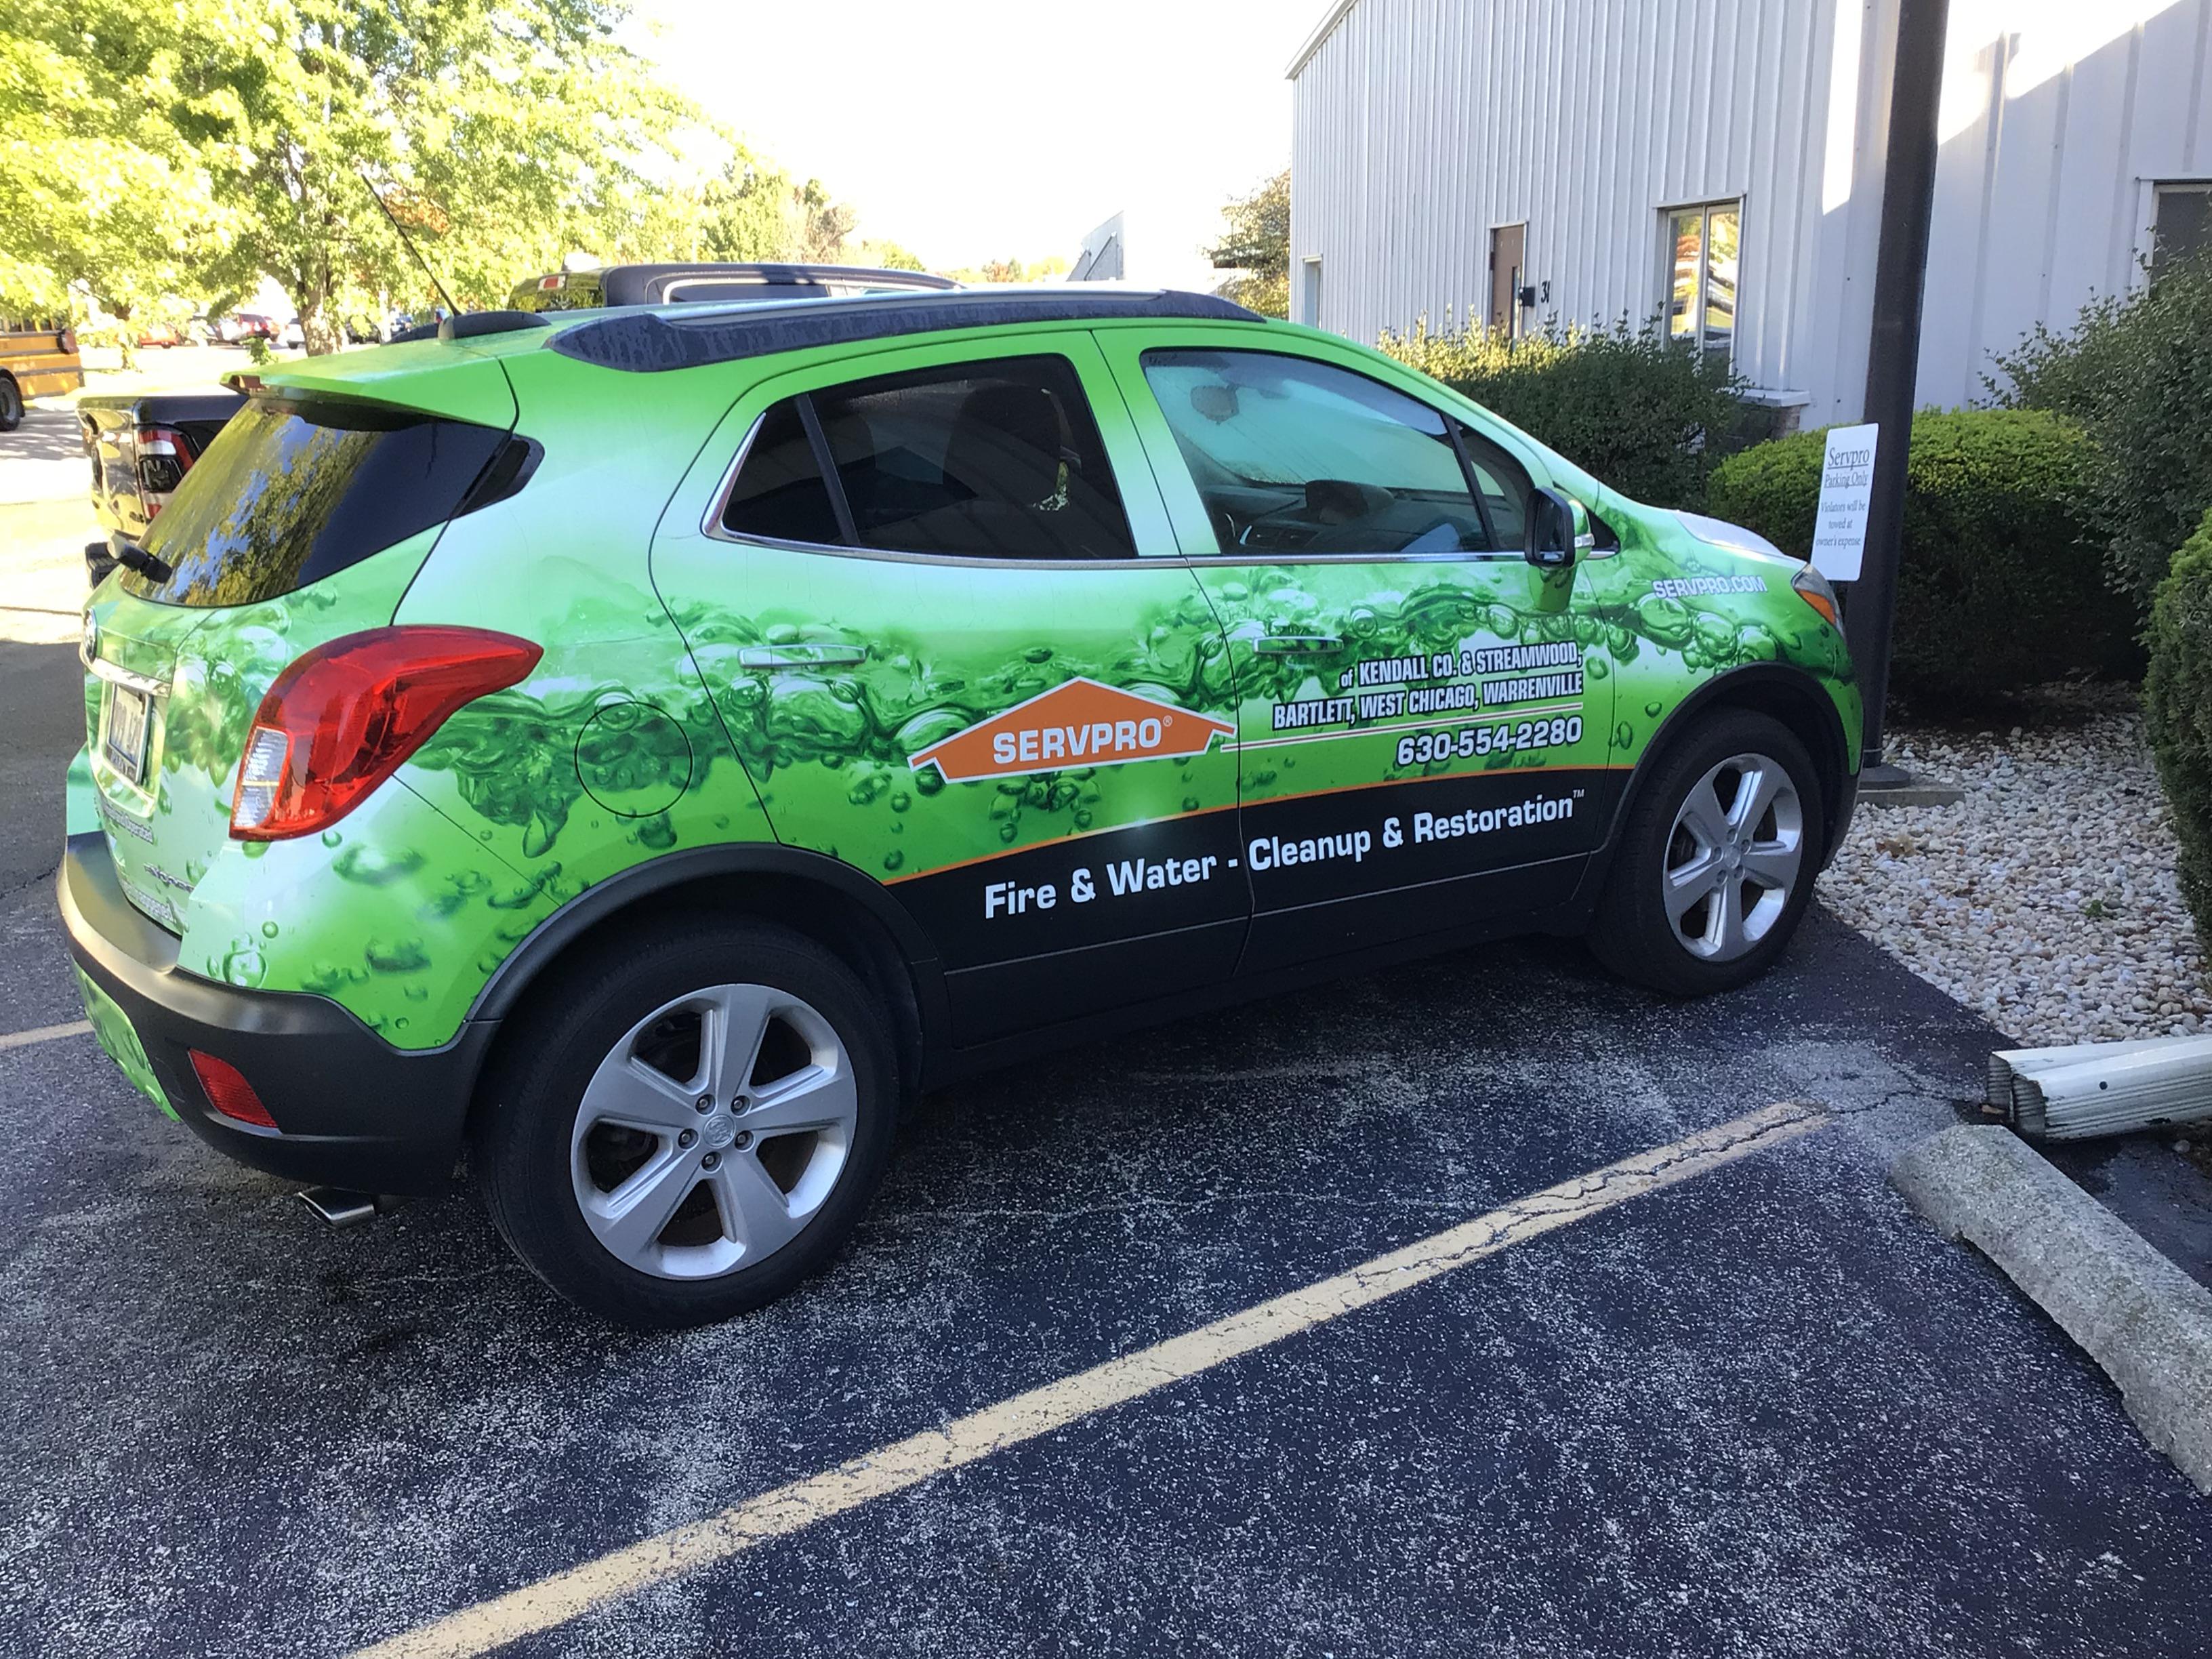 SERVPRO of Kendall County always shows up to our marketing contacts in style!